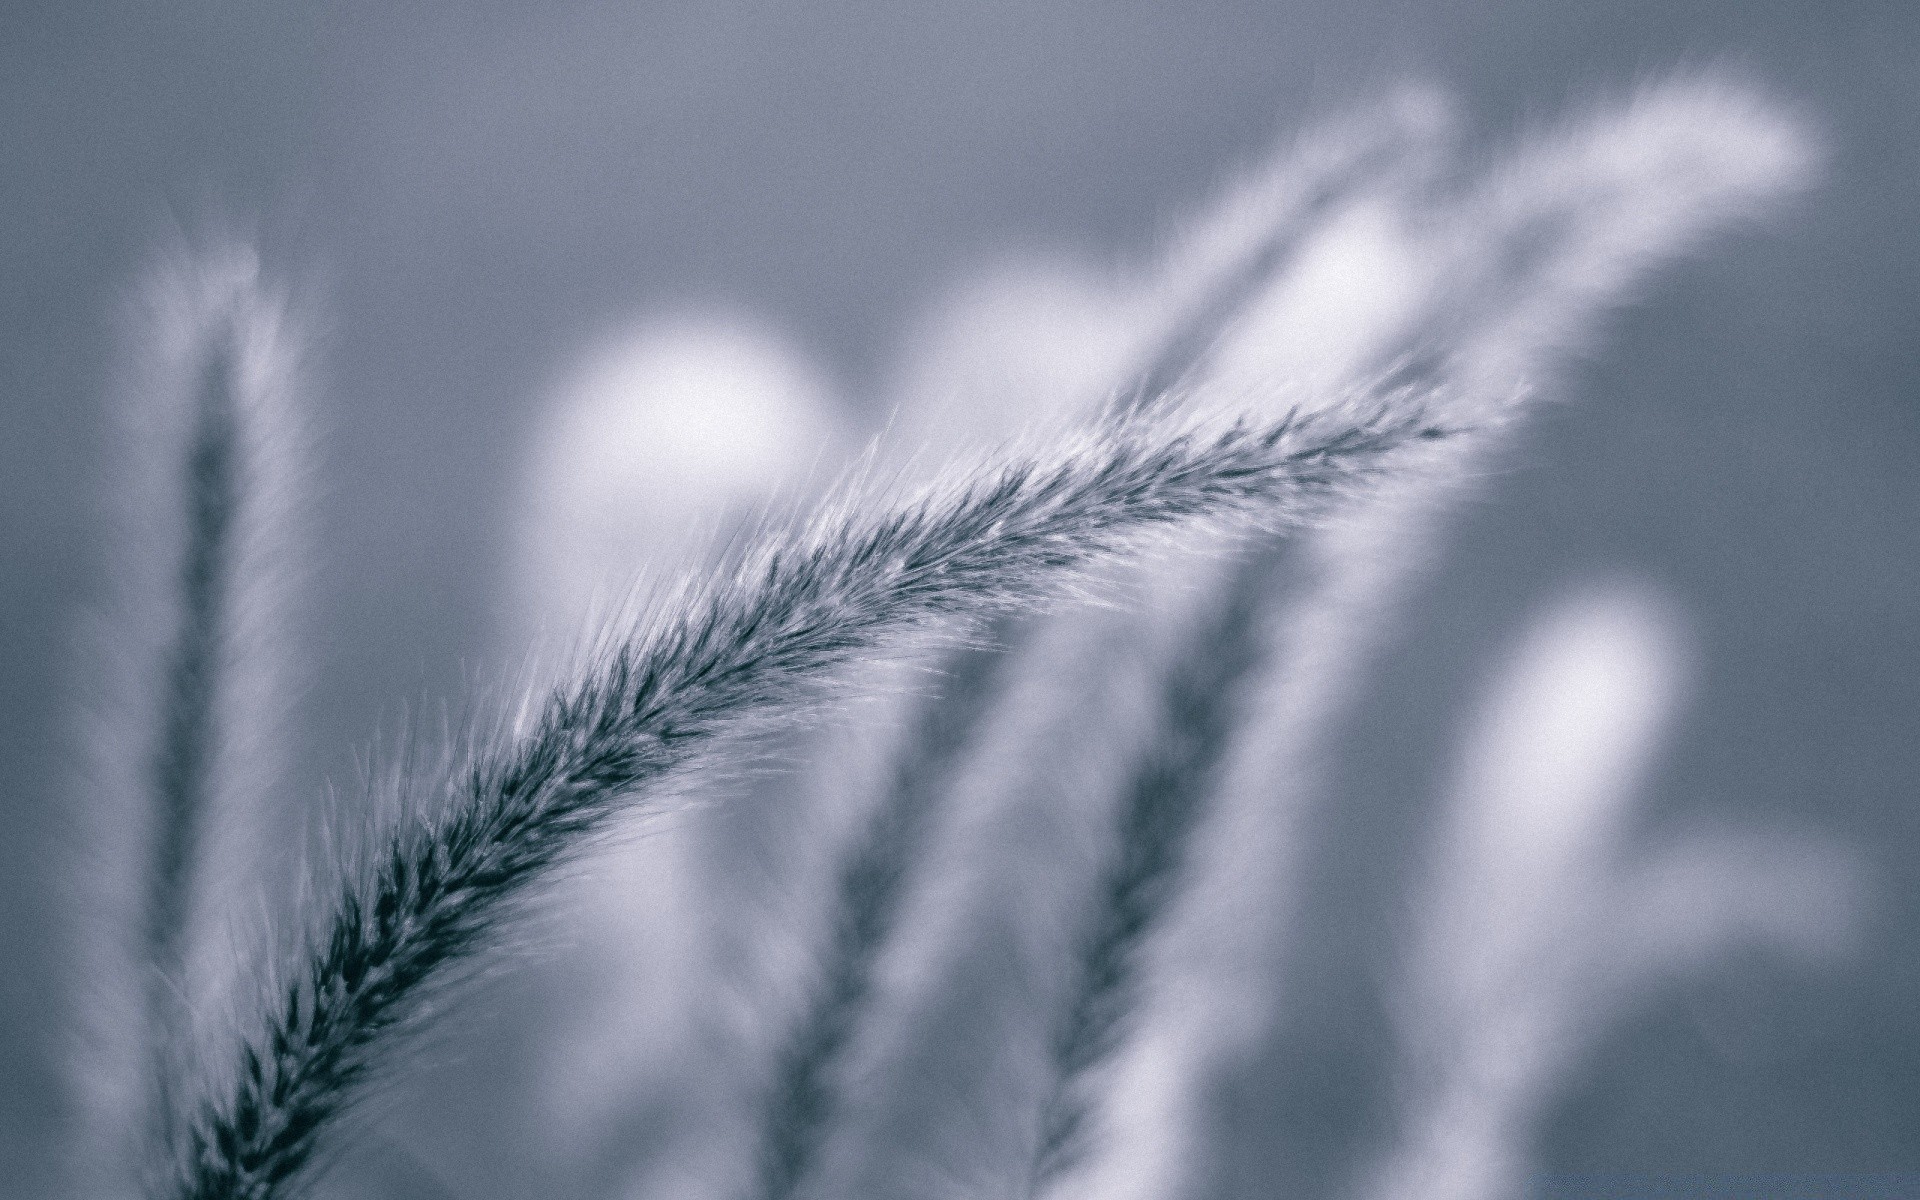 macro nature grass sun wheat weed cereal downy outdoors growth fair weather dawn summer blur winter sky seed